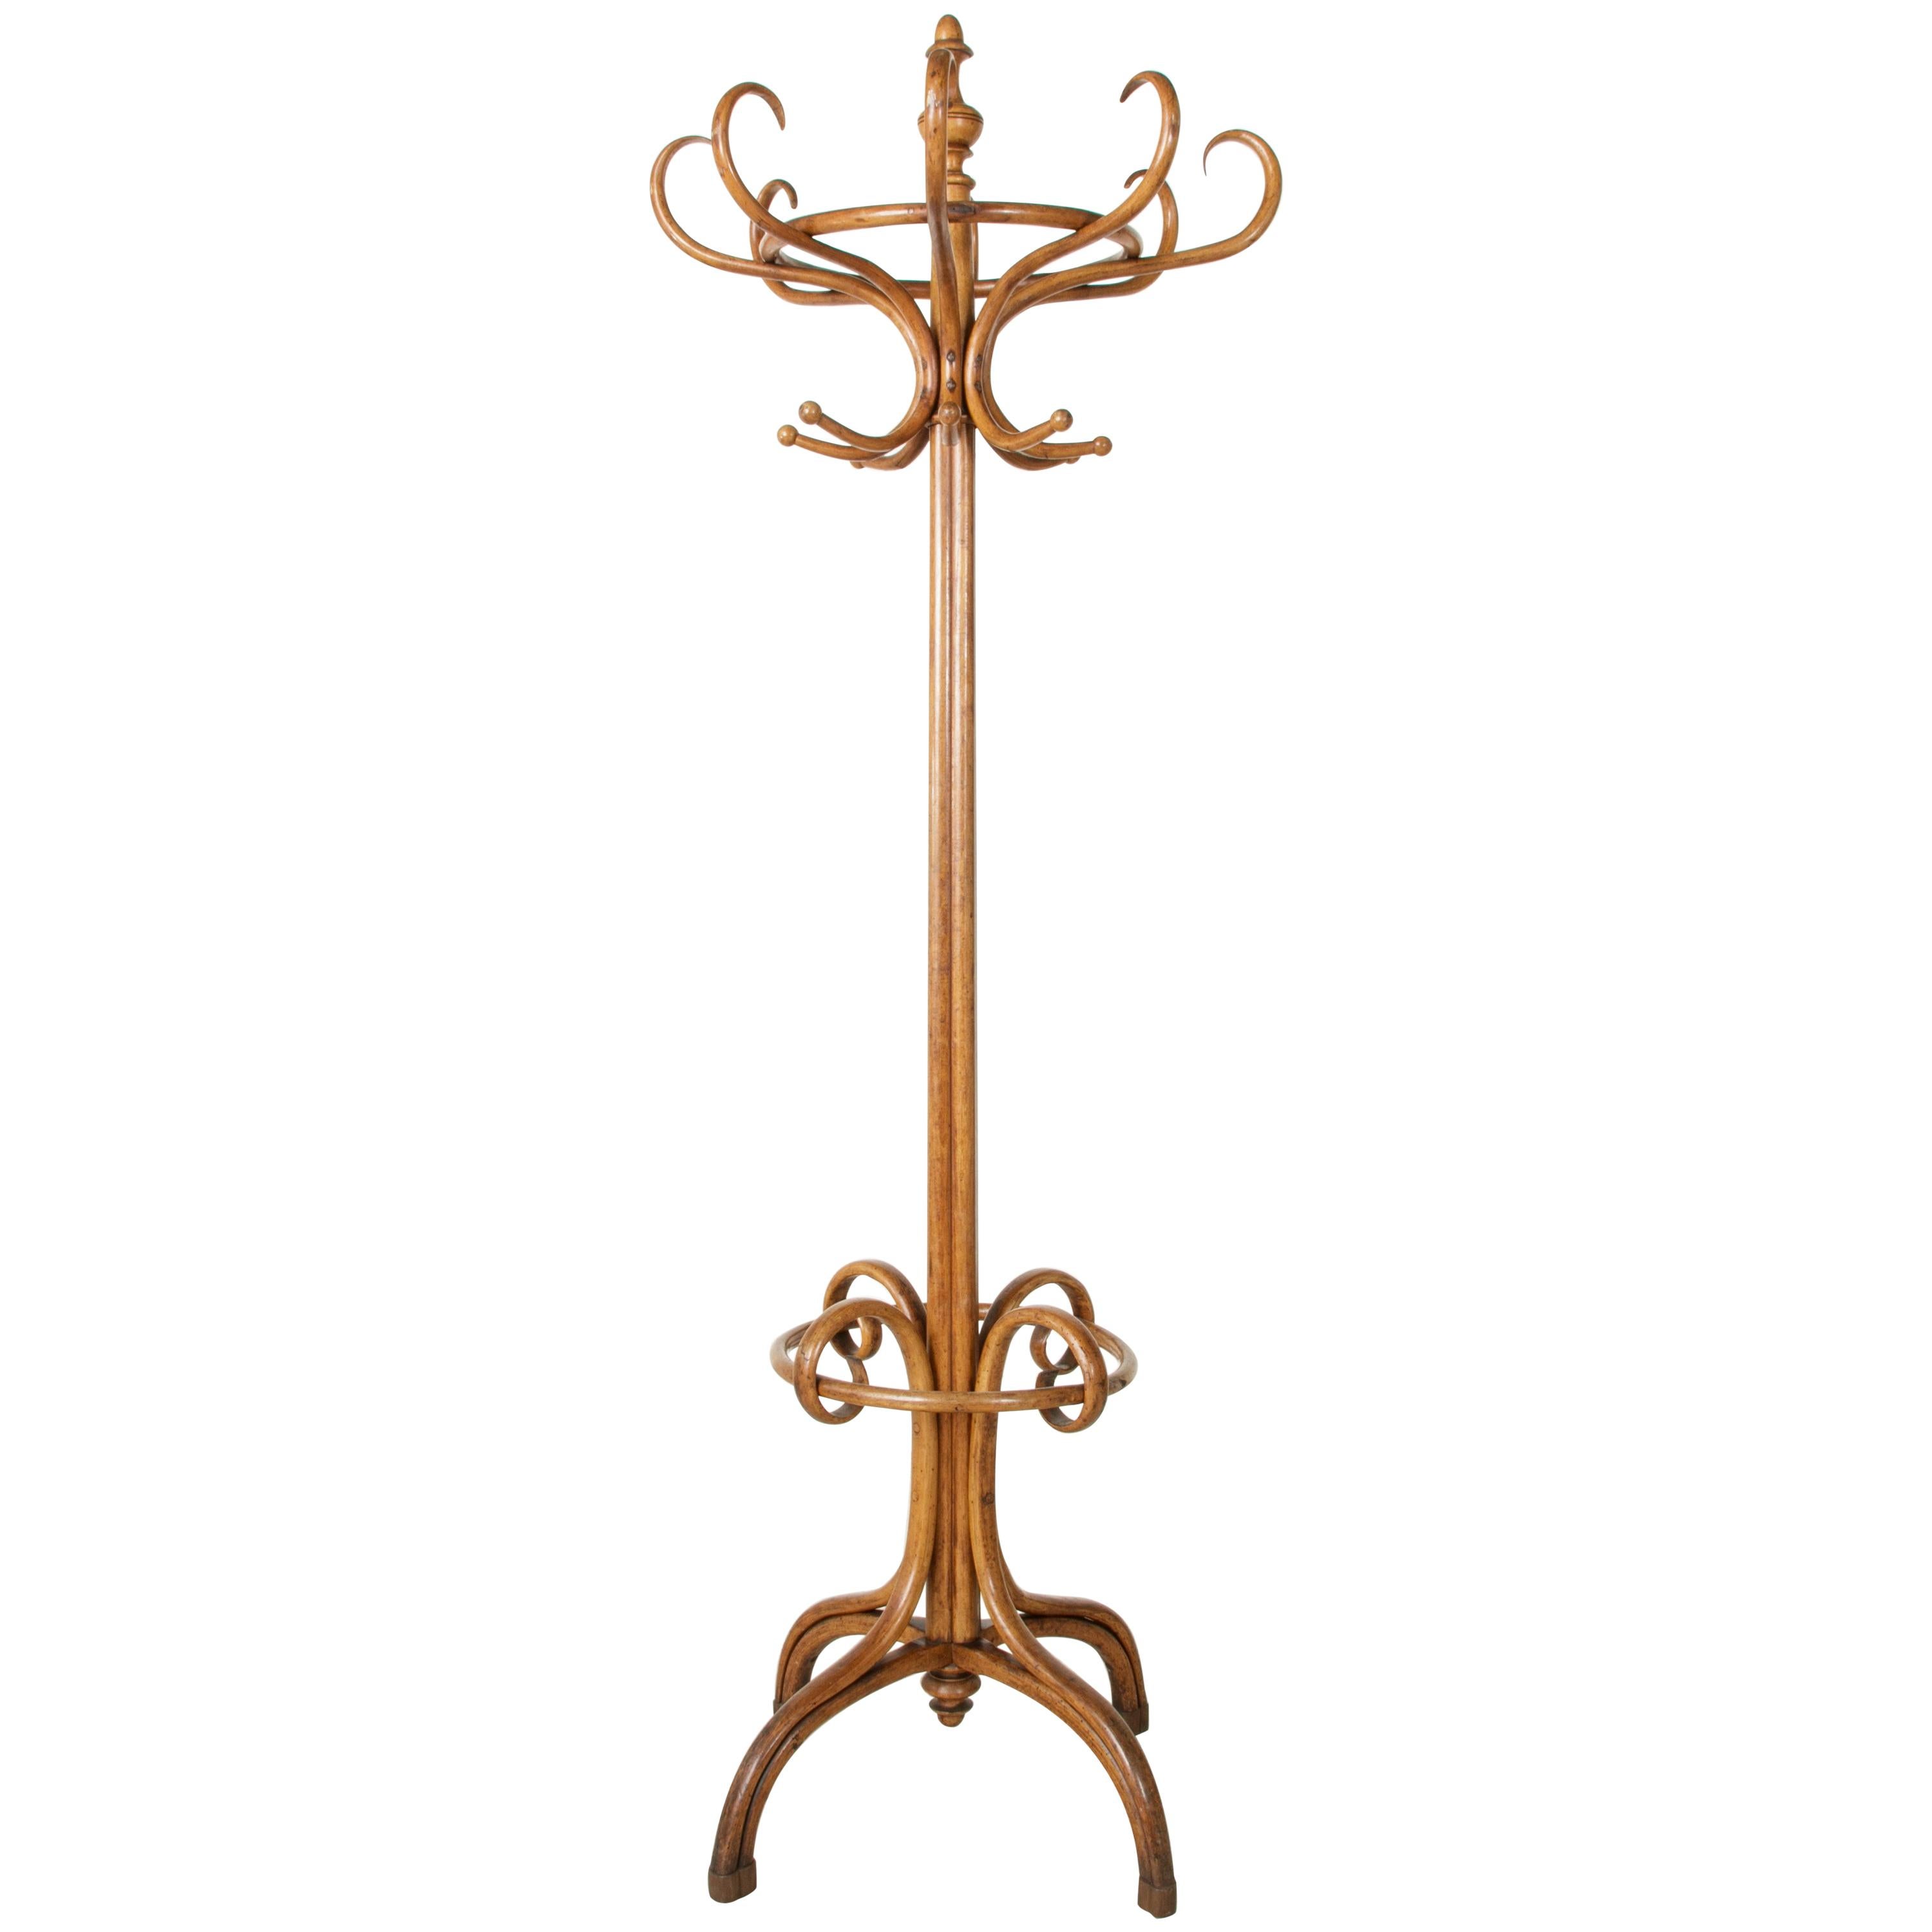 Early 20th Century French Thonet Bentwood Hall Tree Coat and Hat Rack